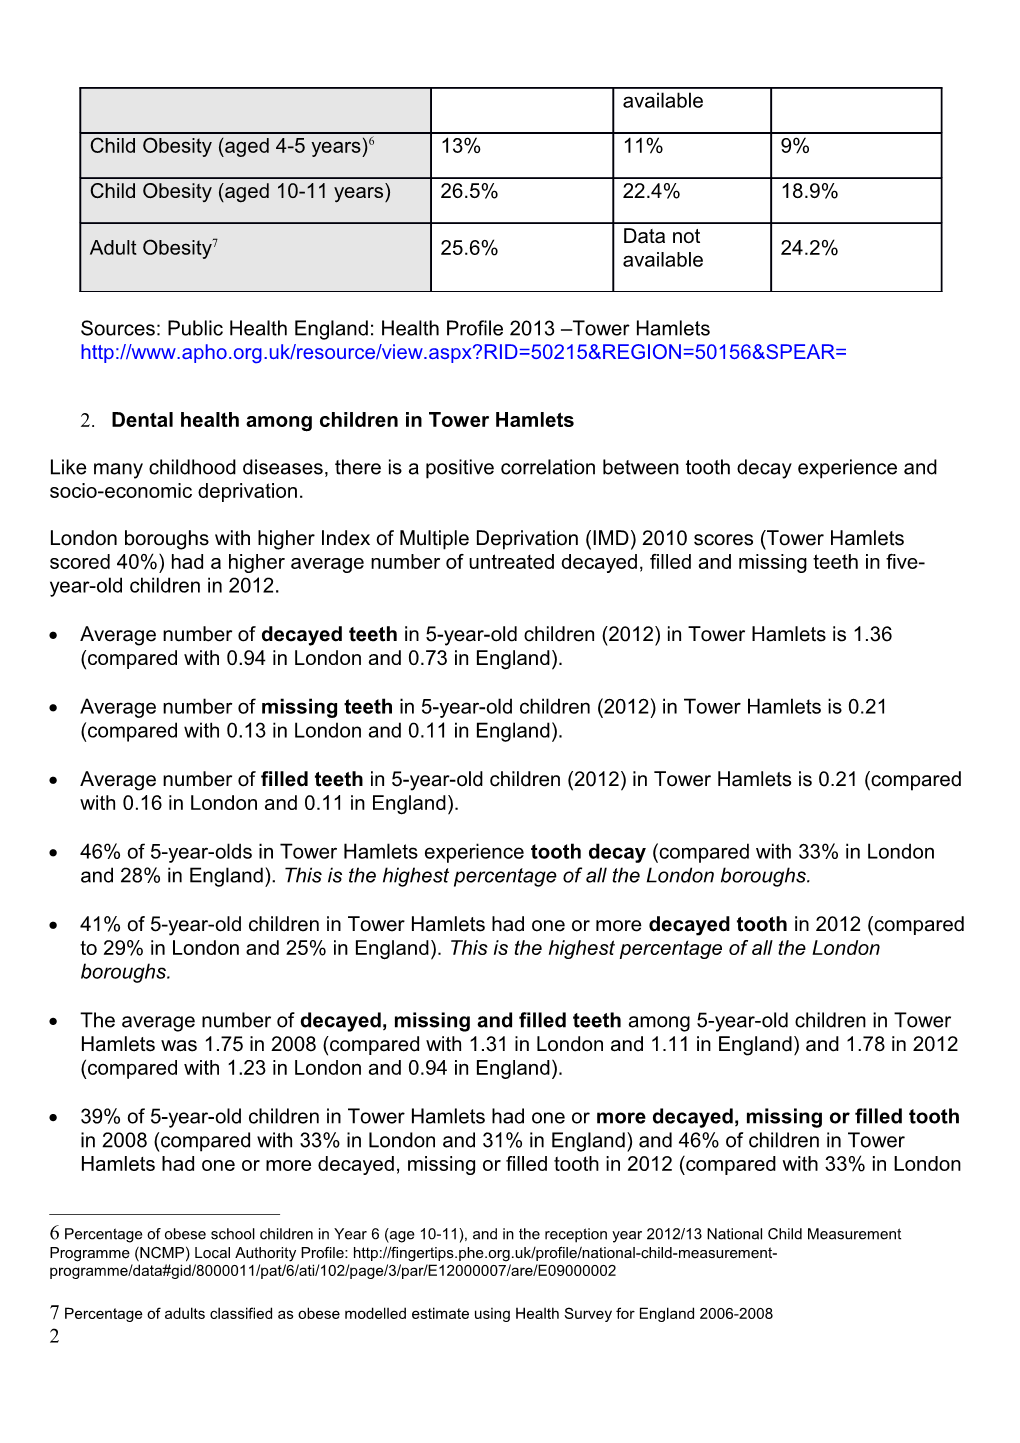 Facts and Figures Oral Health Within the Population of Tower Hamlets